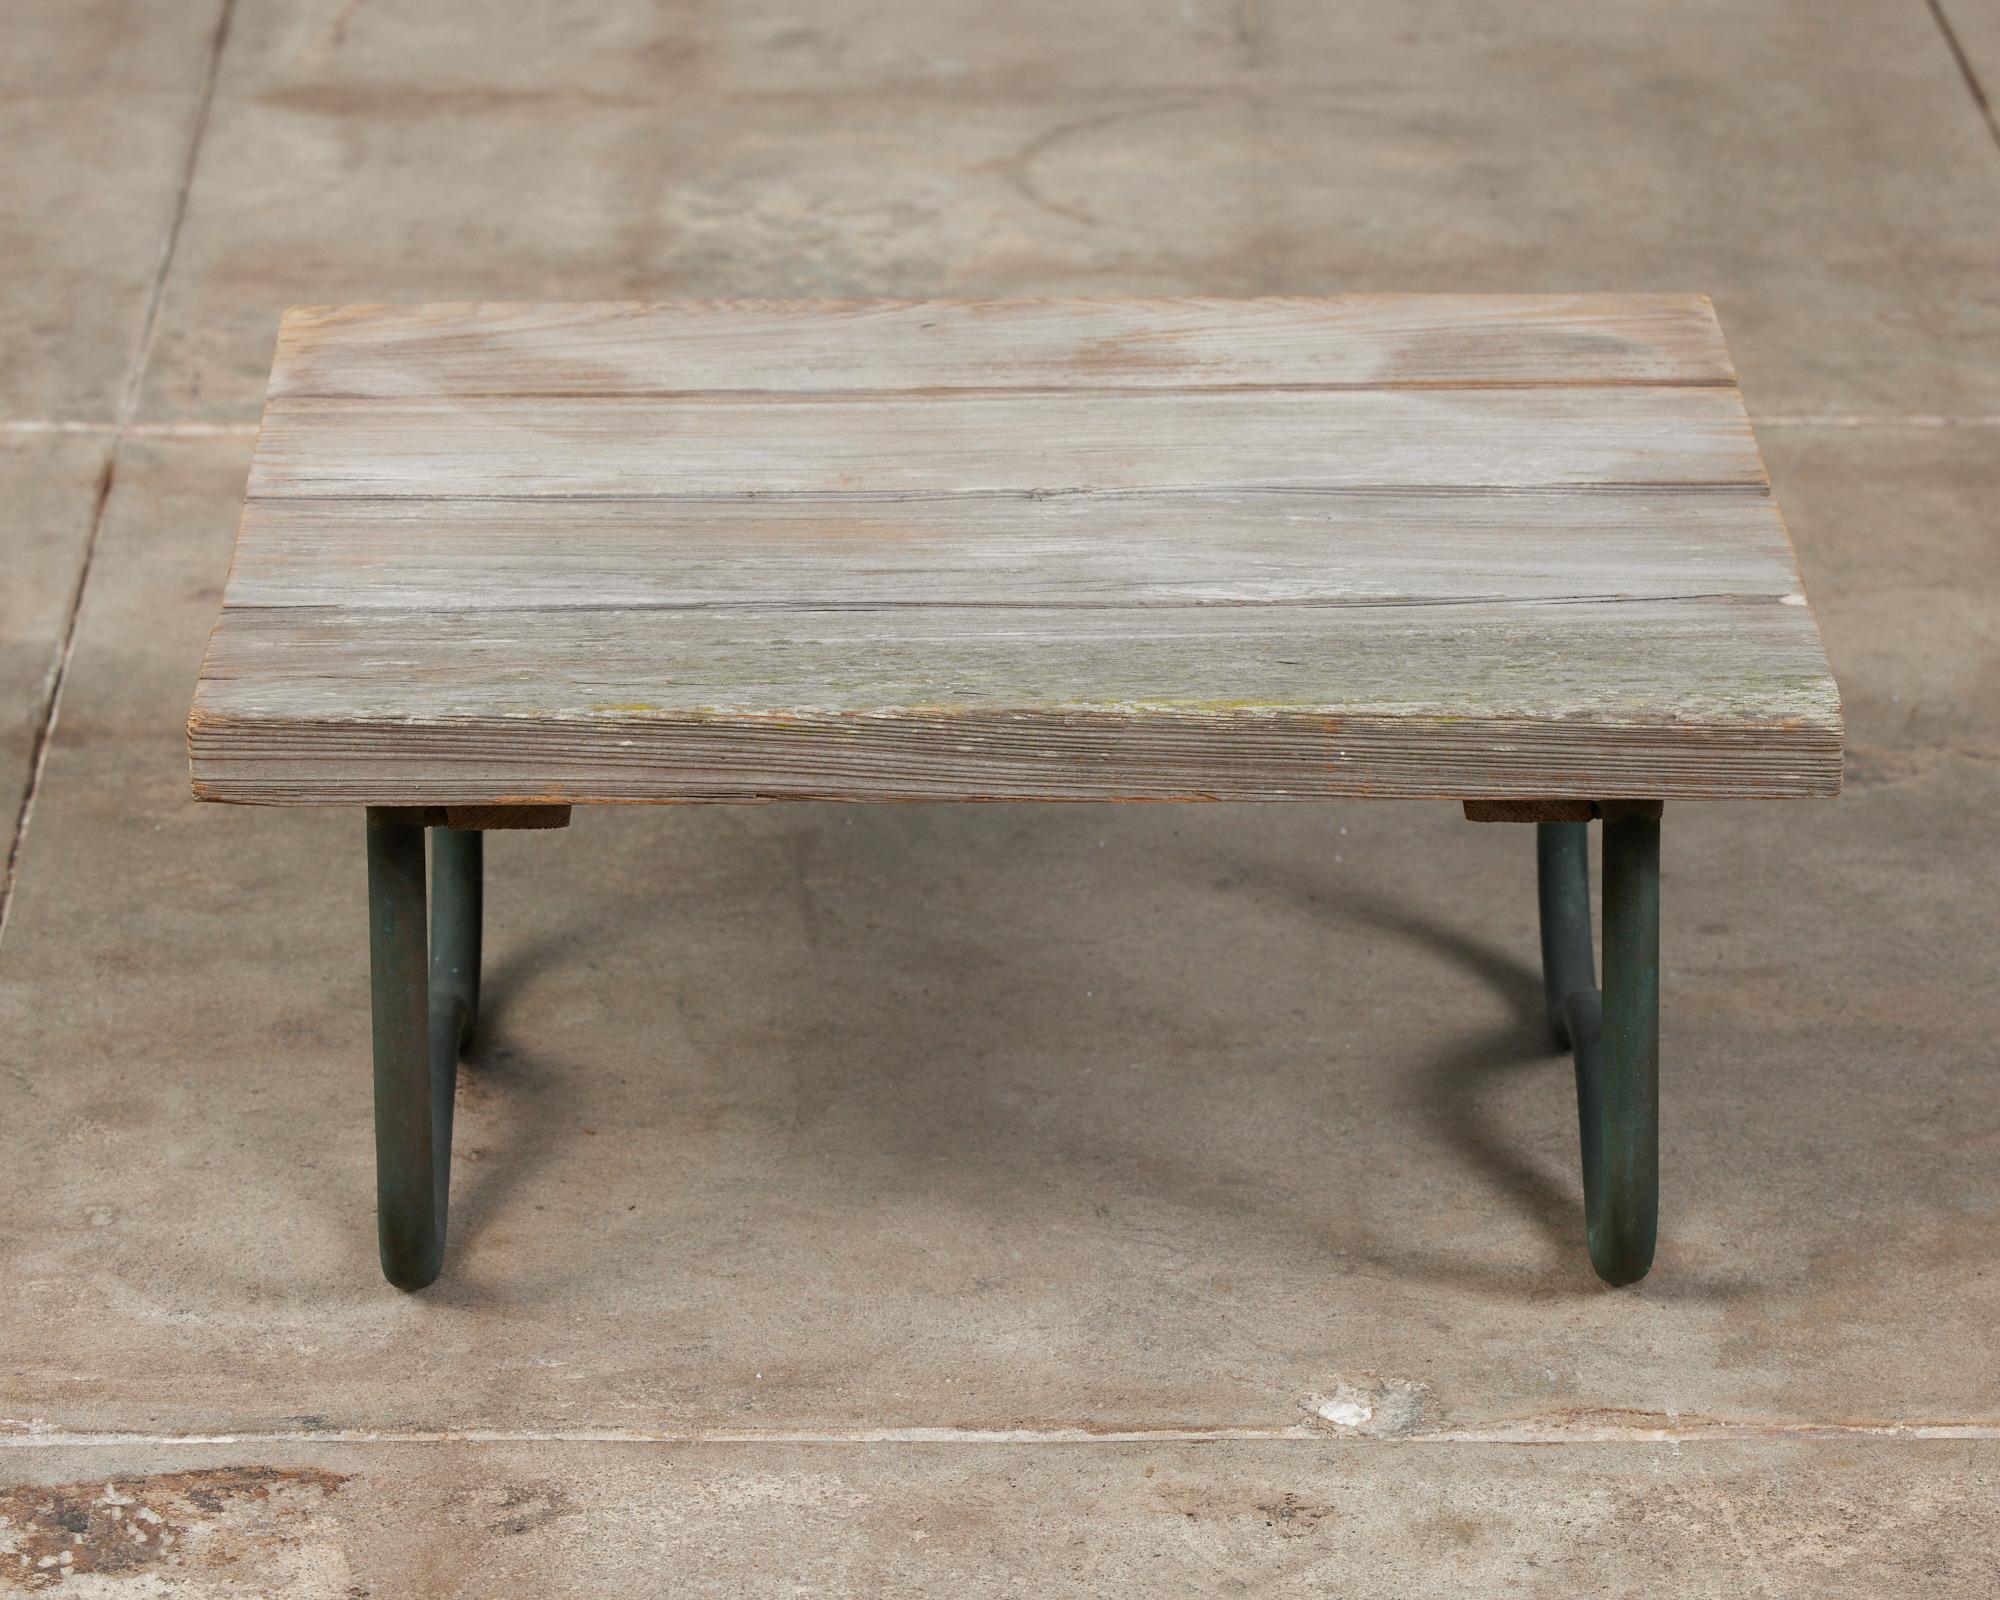 Bronze Patio Beach Table with Wood Top by Walter Lamb for Brown Jordan 1